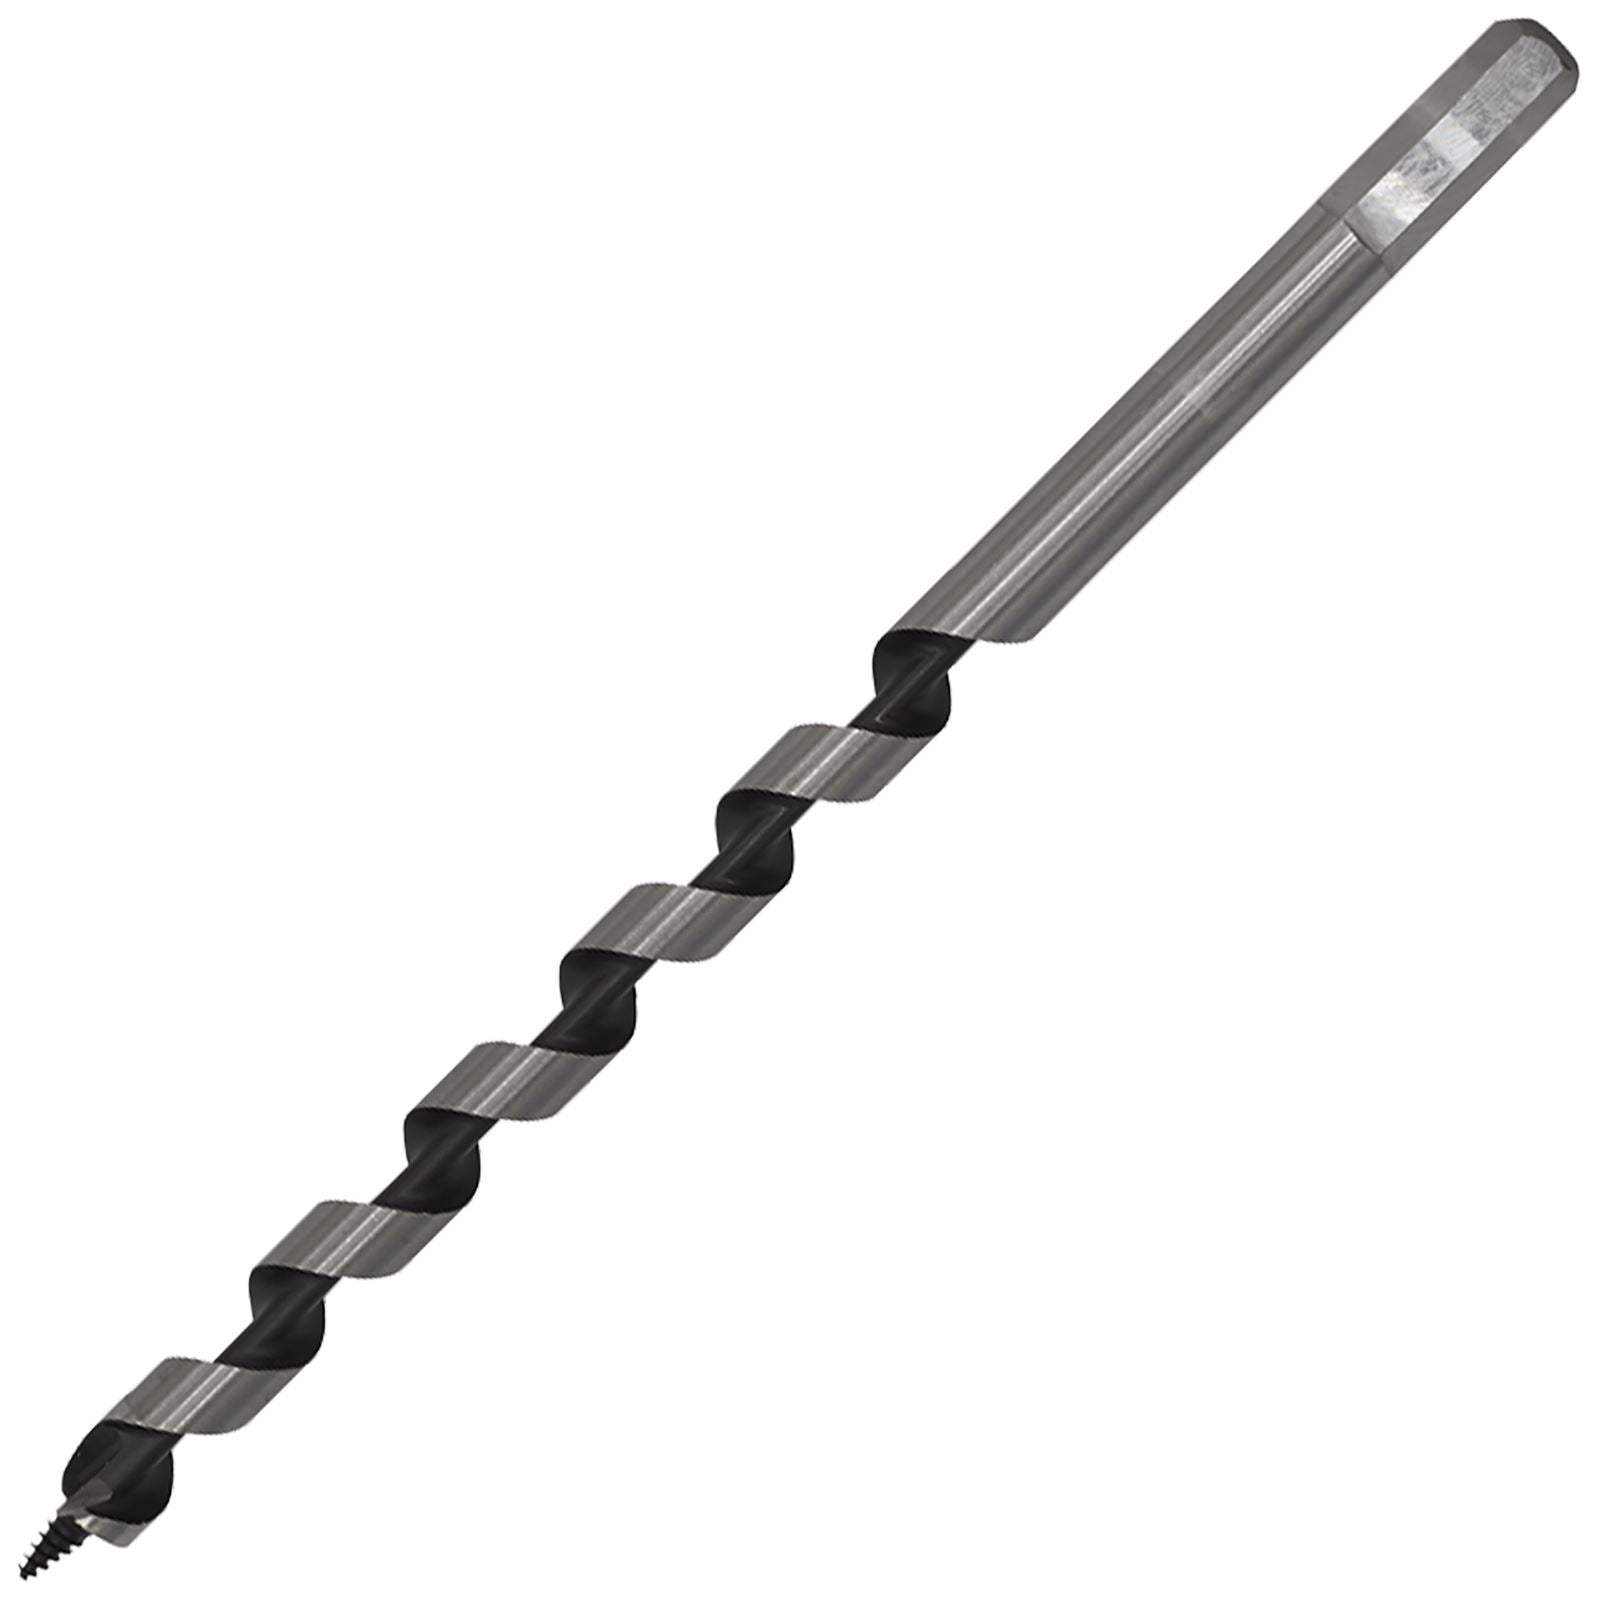 Worksafe by Sealey Auger Wood Drill Bit 12mm x 235mm